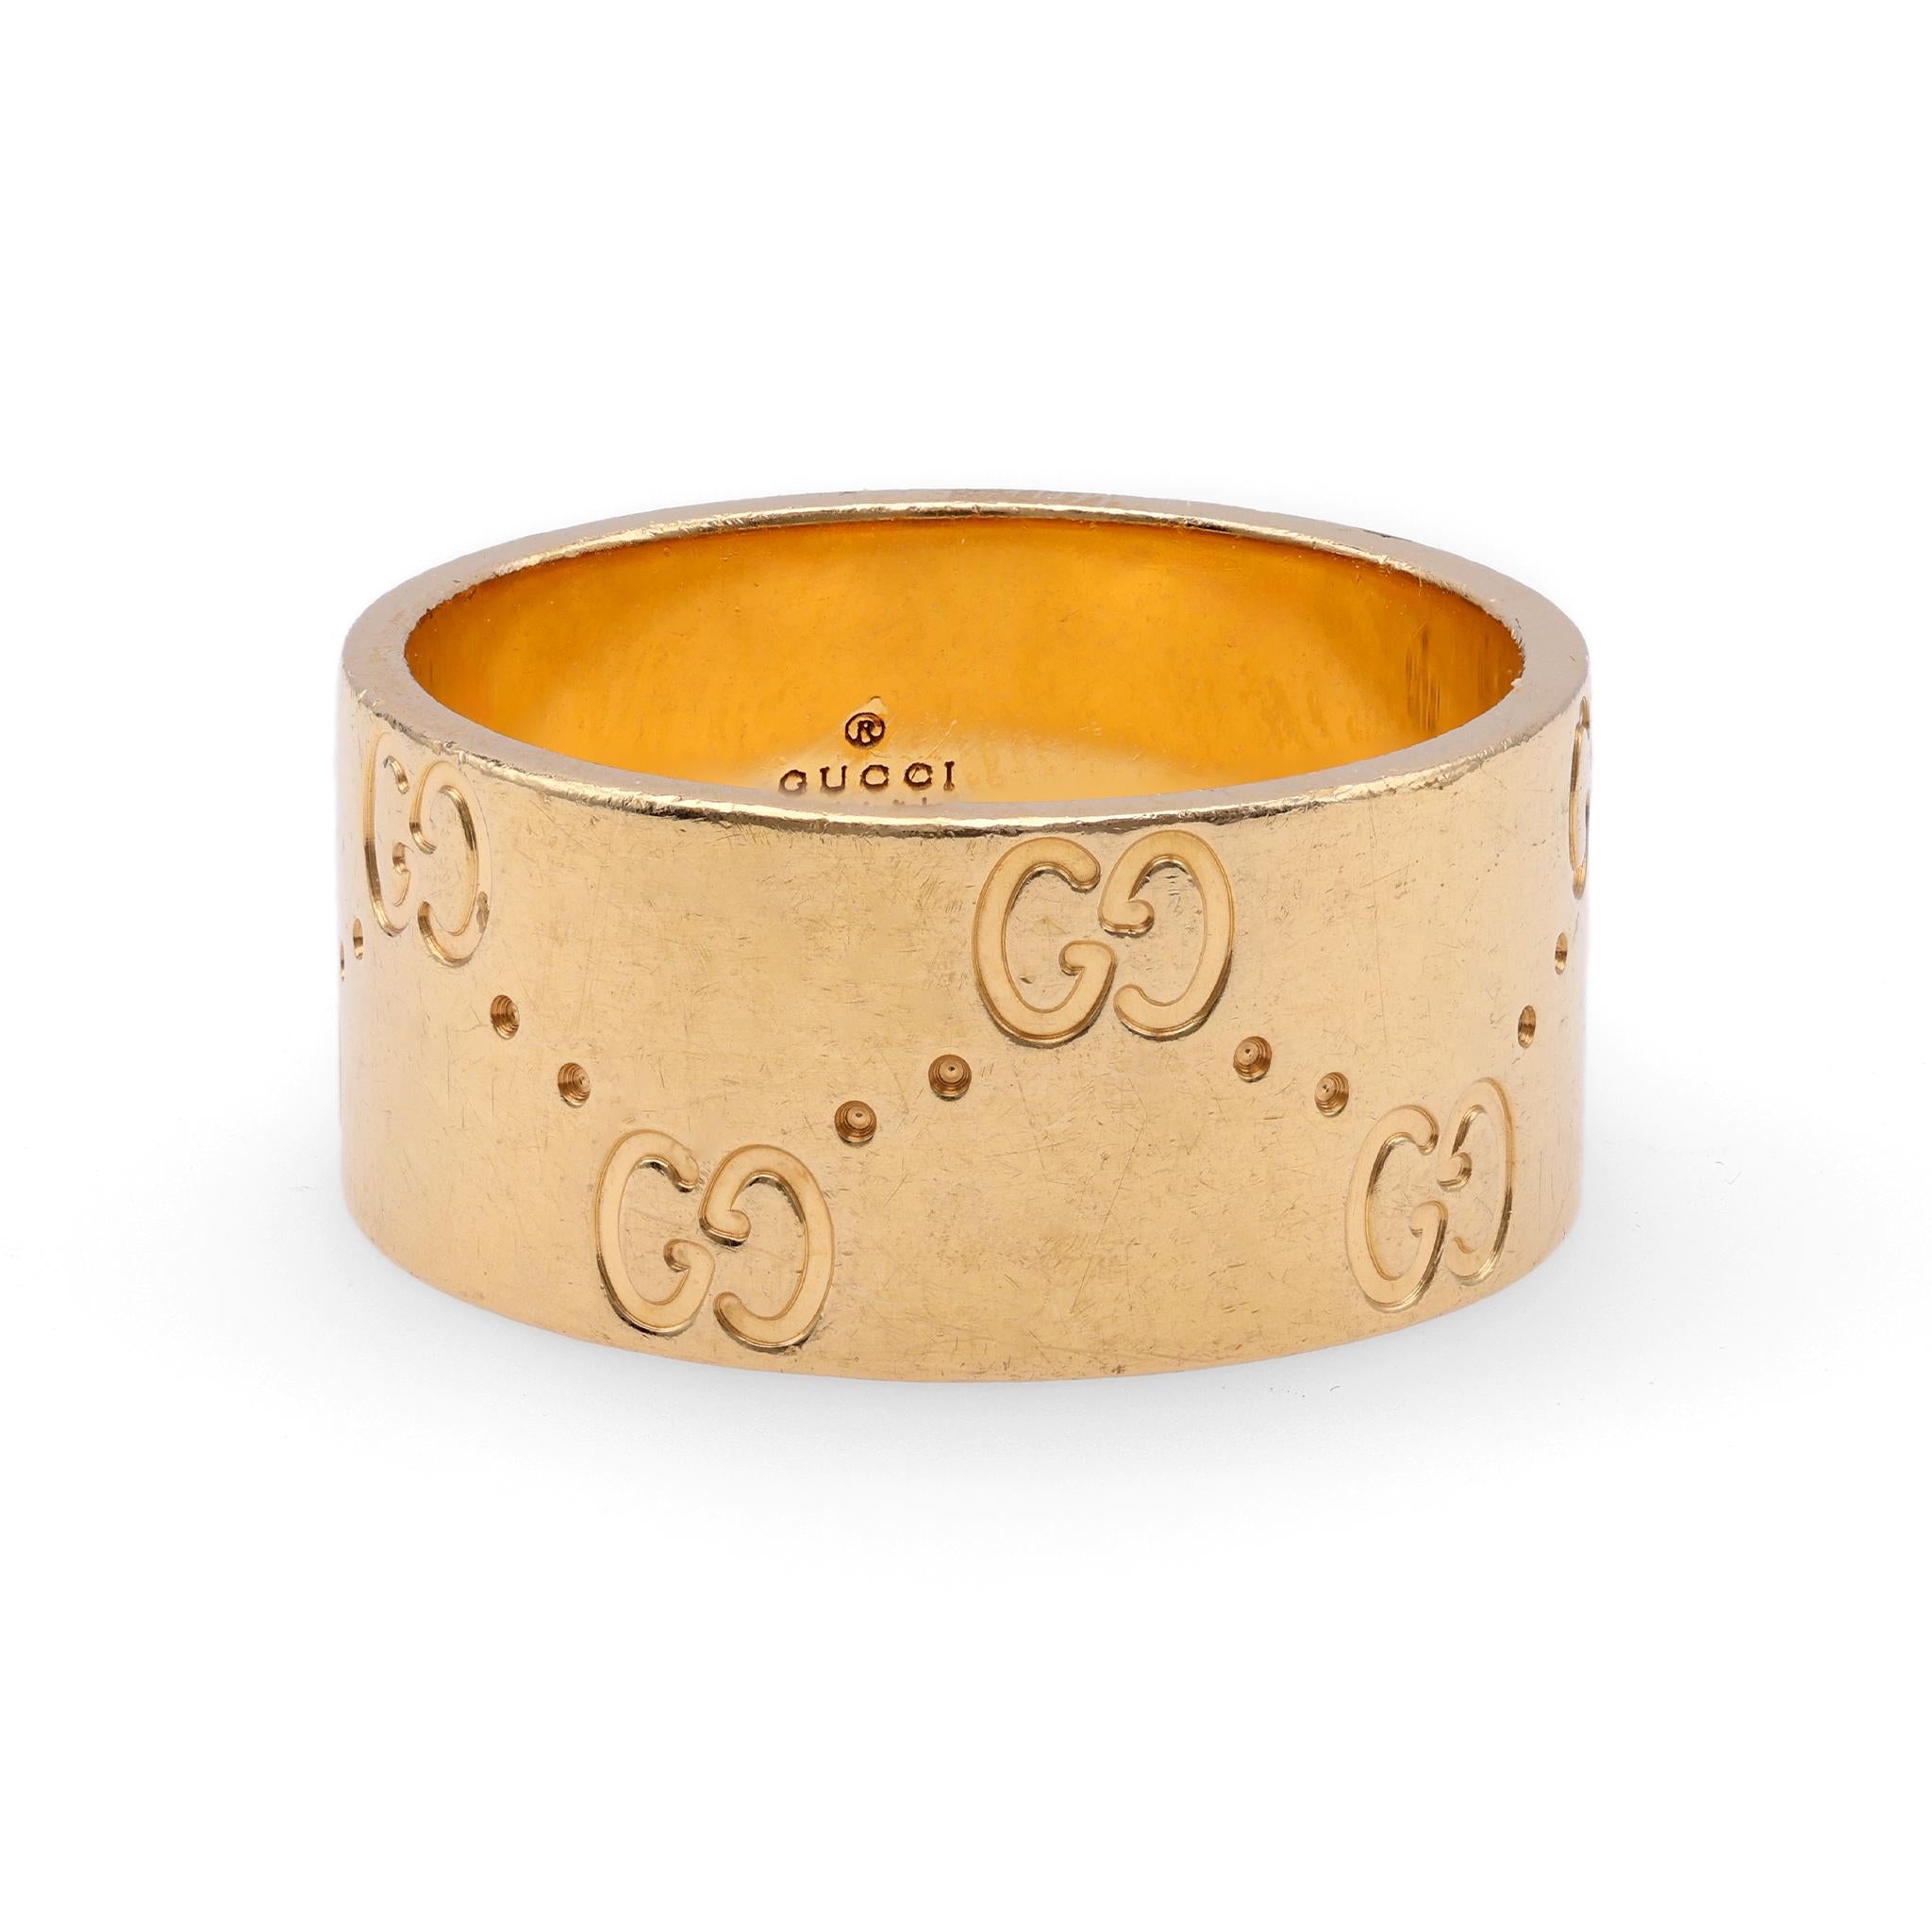 One Gucci Italian 18k Yellow Gold Icon Band Ring.